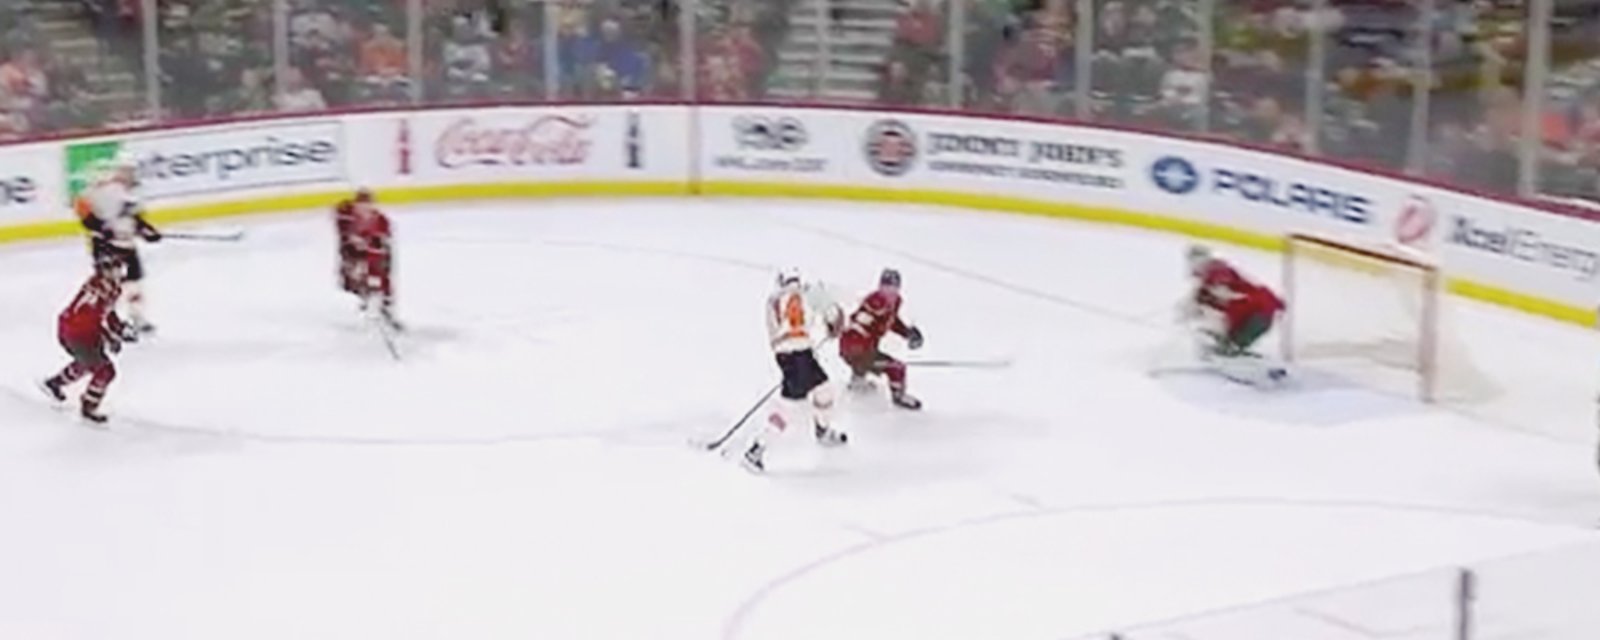 MUST SEE: Couturier’s slick goal after sweeping the puck between his legs.